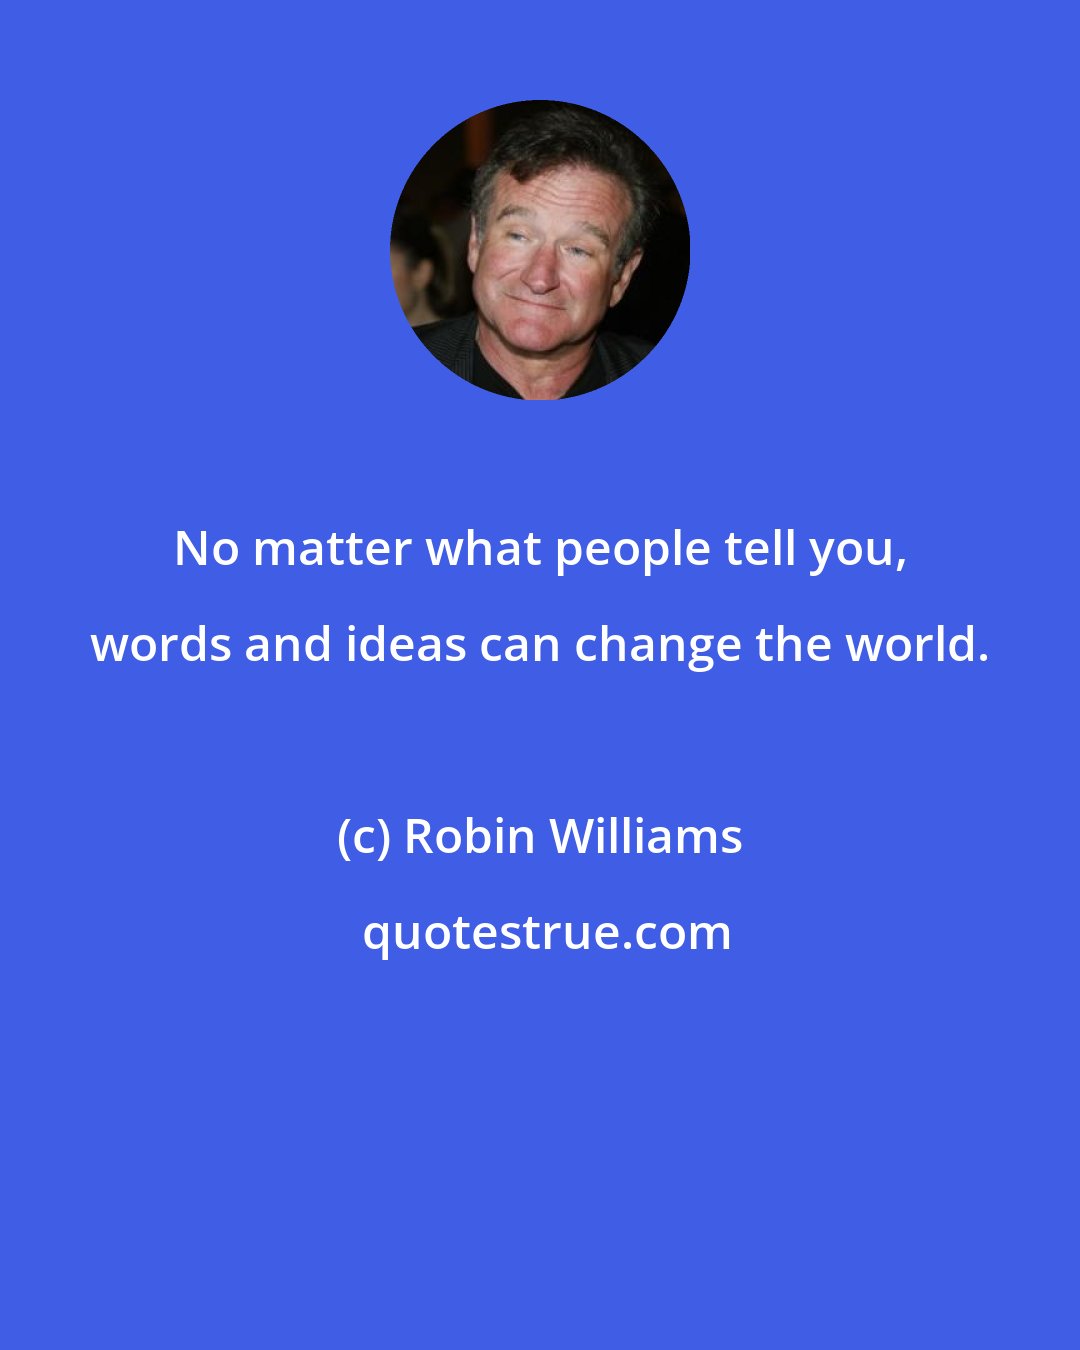 Robin Williams: No matter what people tell you, words and ideas can change the world.